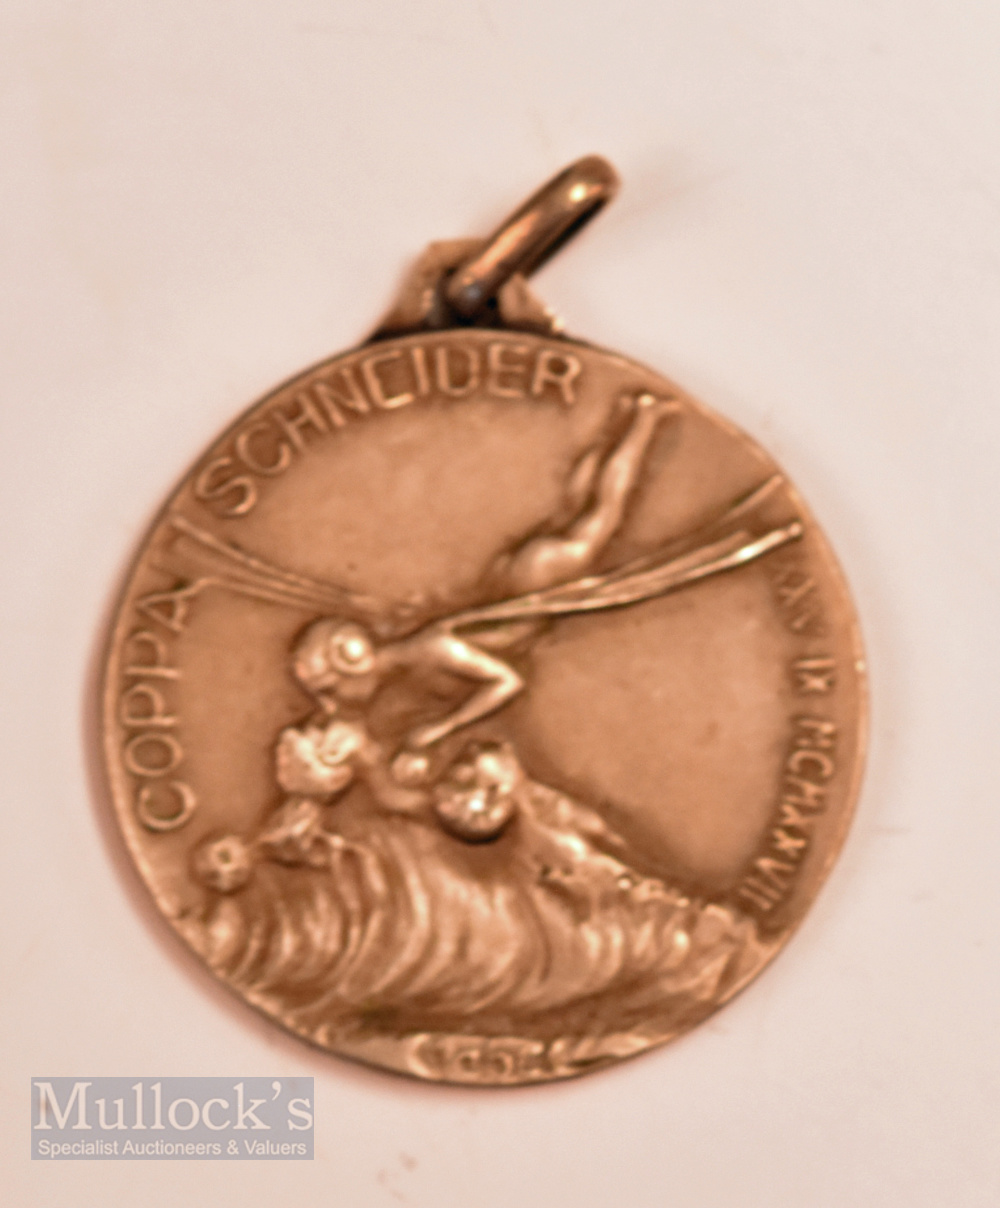 Schneider Trophy Cup Air Races, 1927 White Metal Medallion Obverse; Racing Seaplane, and winged - Image 2 of 2